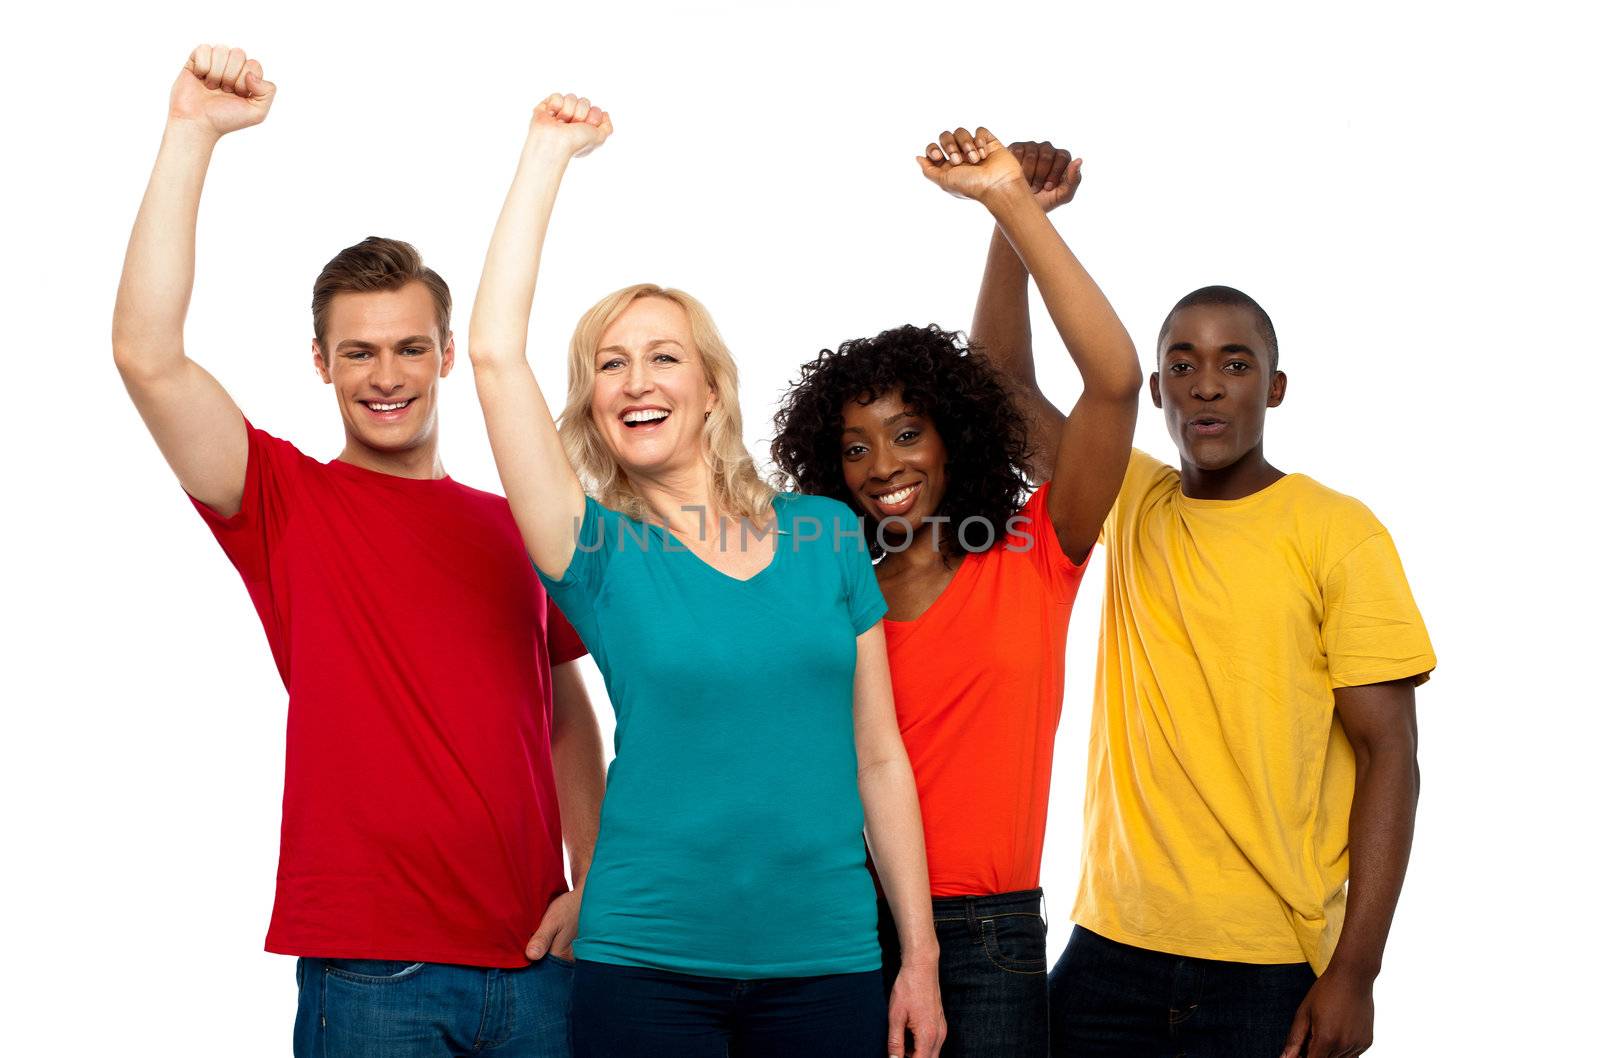 Excited teenager group posing with raised arms by stockyimages